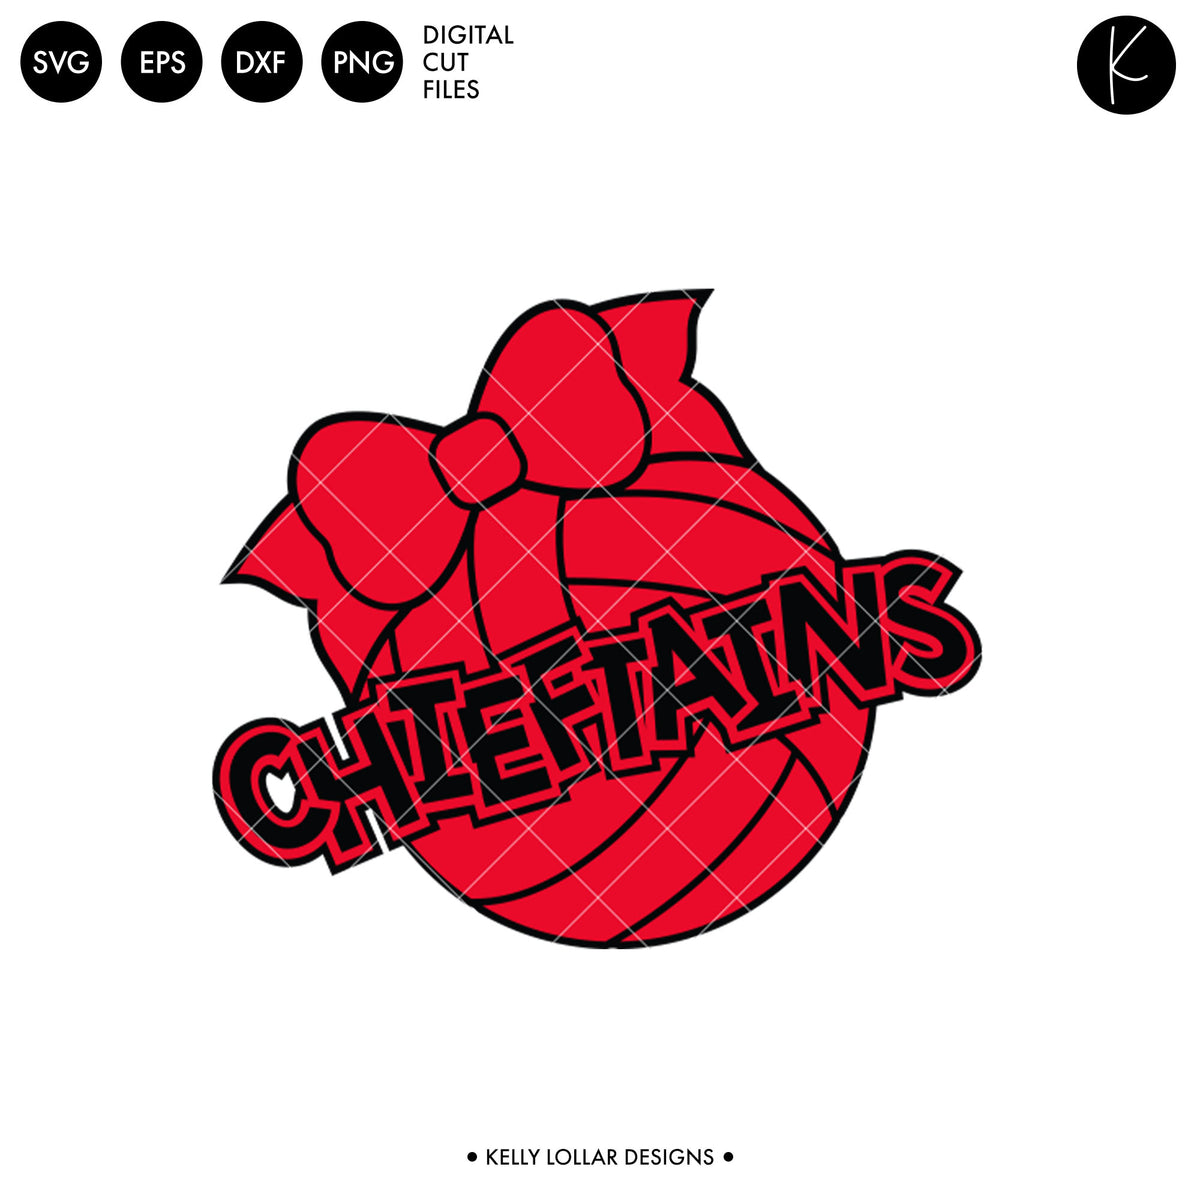 Chieftains Volleyball Bundle | SVG DXF EPS PNG Cut Files